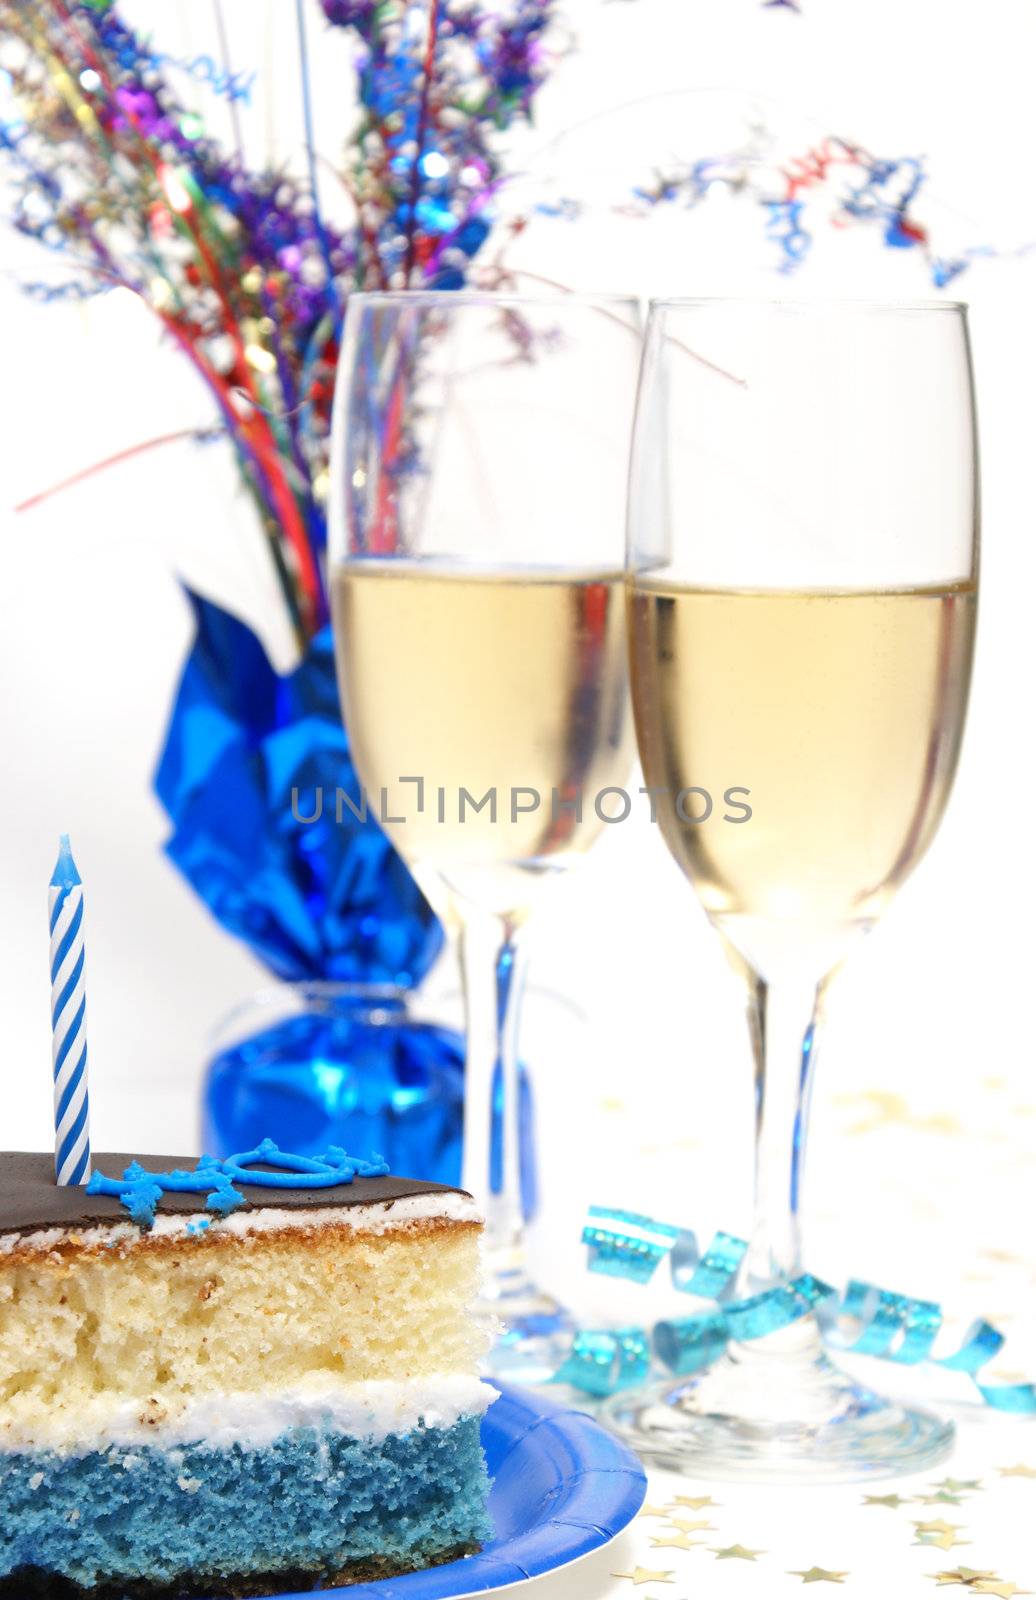 A slice of cake in front of two glasses of champagne.